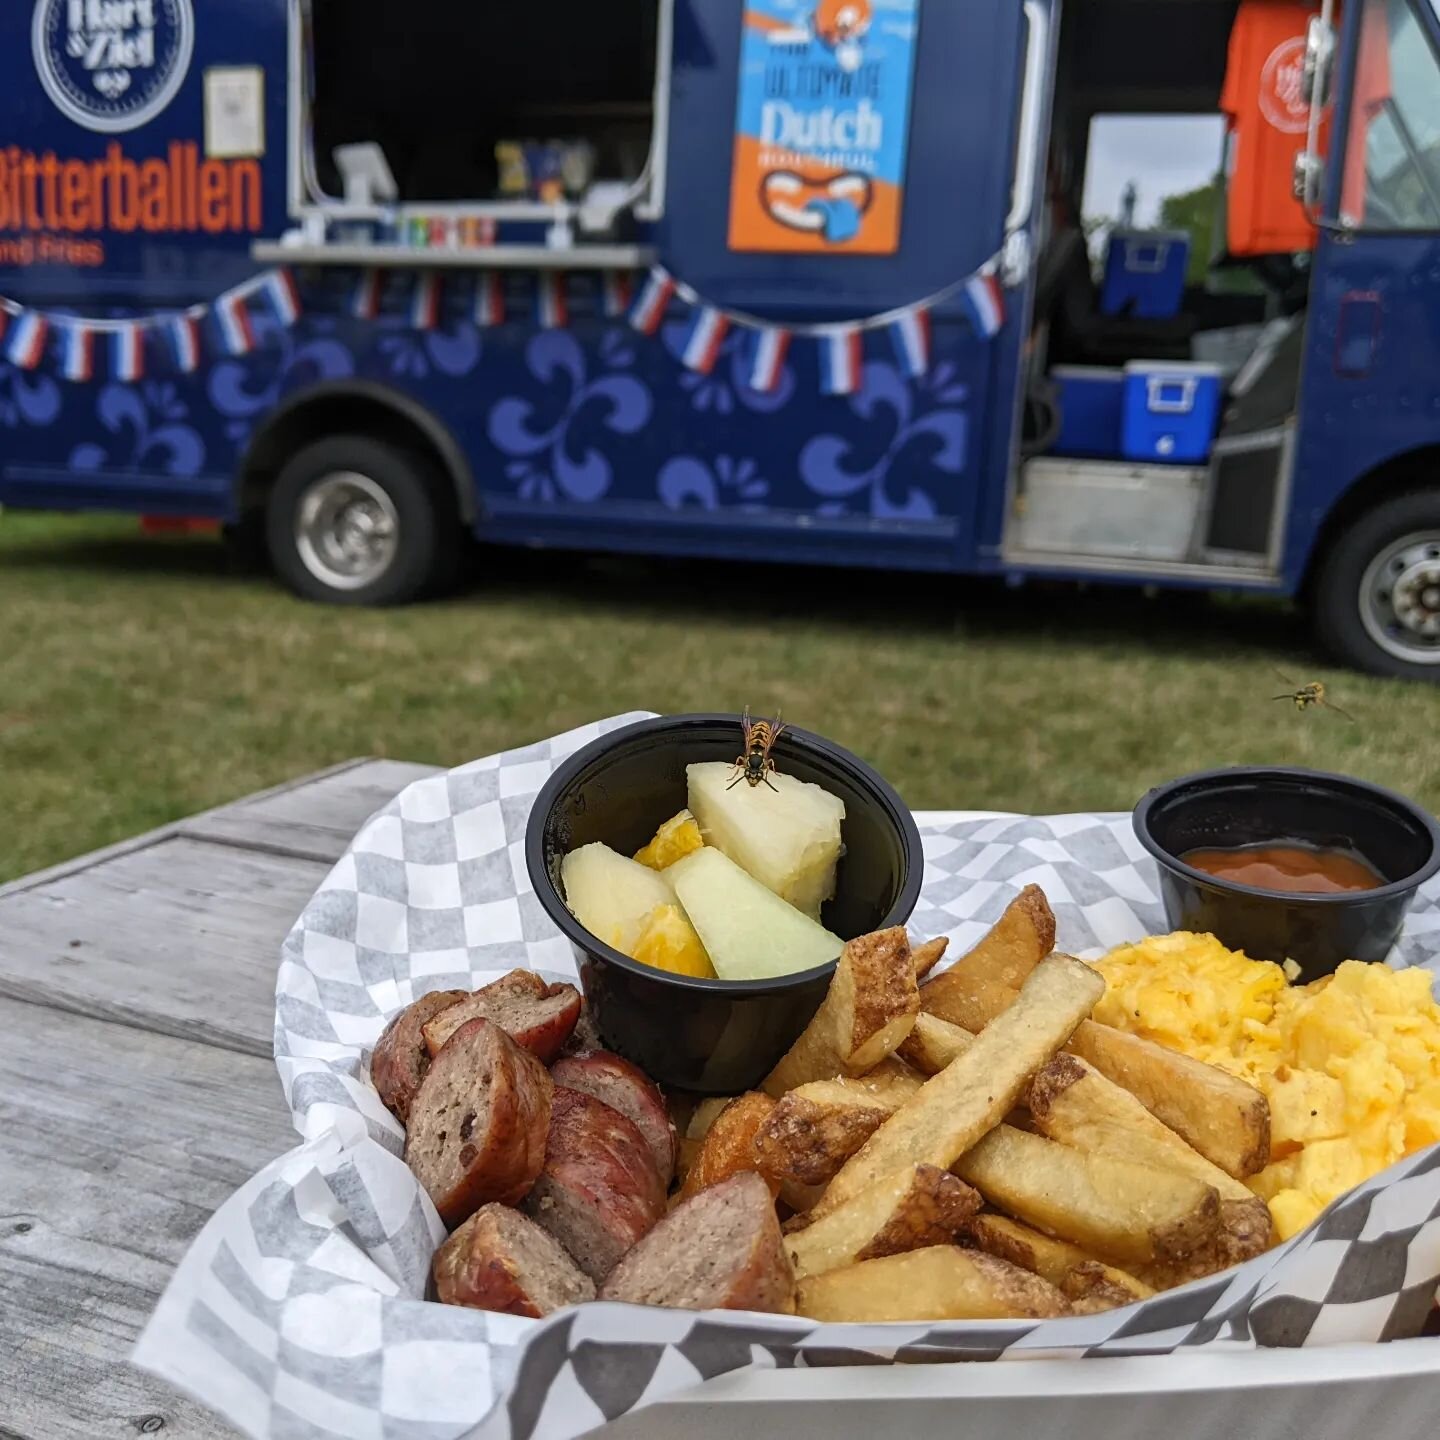 We're here and we're betting you're hungry! Come by for a hearty breakfast to help you plan your day @jalopyjamup! 

#glutenfreefoodtruck #breakfast #sohungry #startyourdayright #eggsandsausage #fruitsalad #jalopyjamup #rocktonontario #curryketchup #